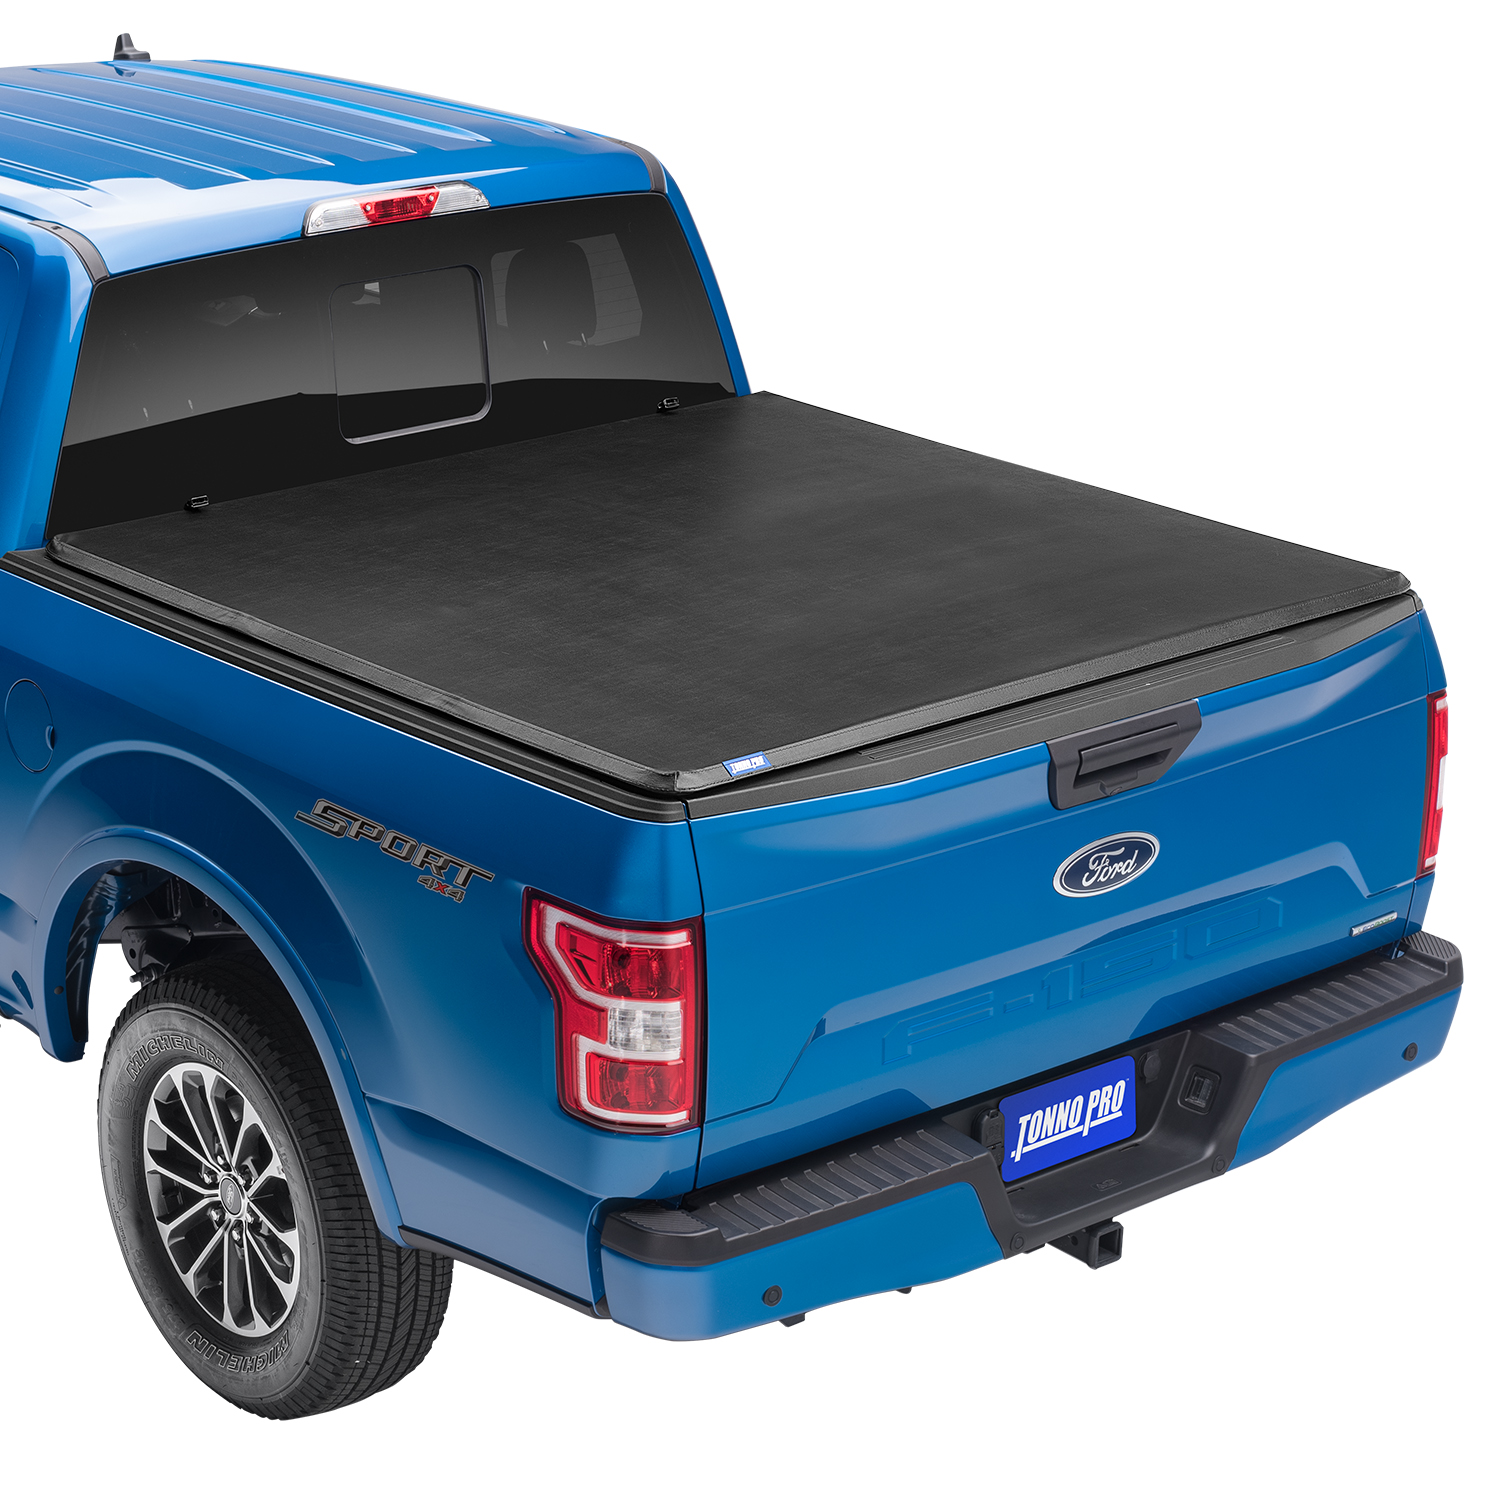 Soft Folding Truck Bed Tonneau Cover Fits 2019-2021 Ford Ranger 5 1 Bed Tonno Pro Tonno Fold 61 42-317